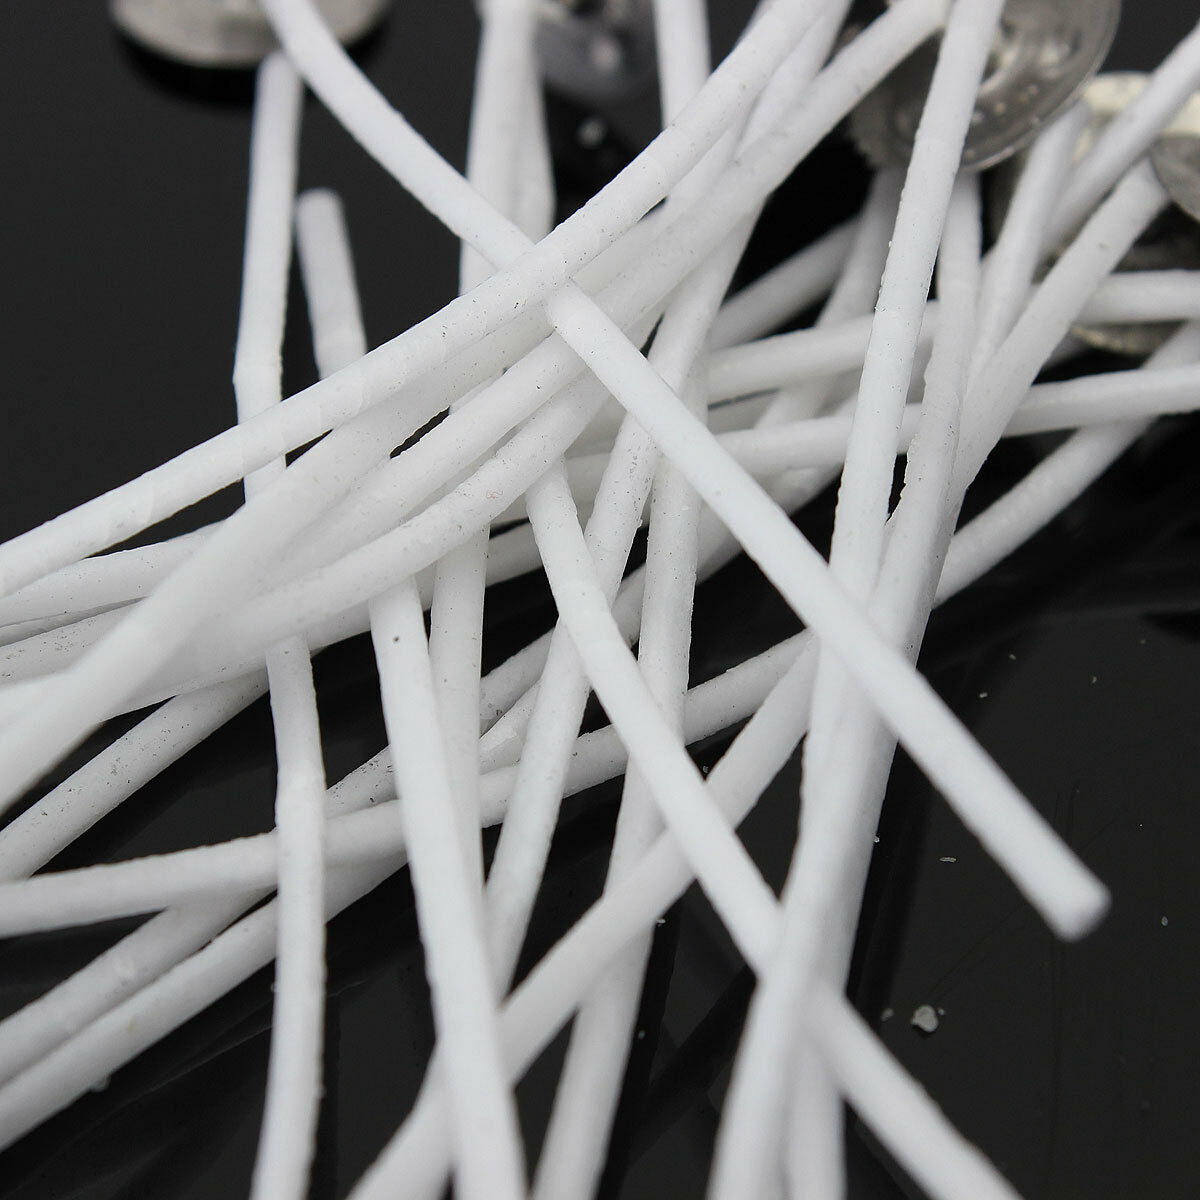 100Pcs 8cm-80mm Pre Waxed Candle Wicks With Sustainers Quality Wicks